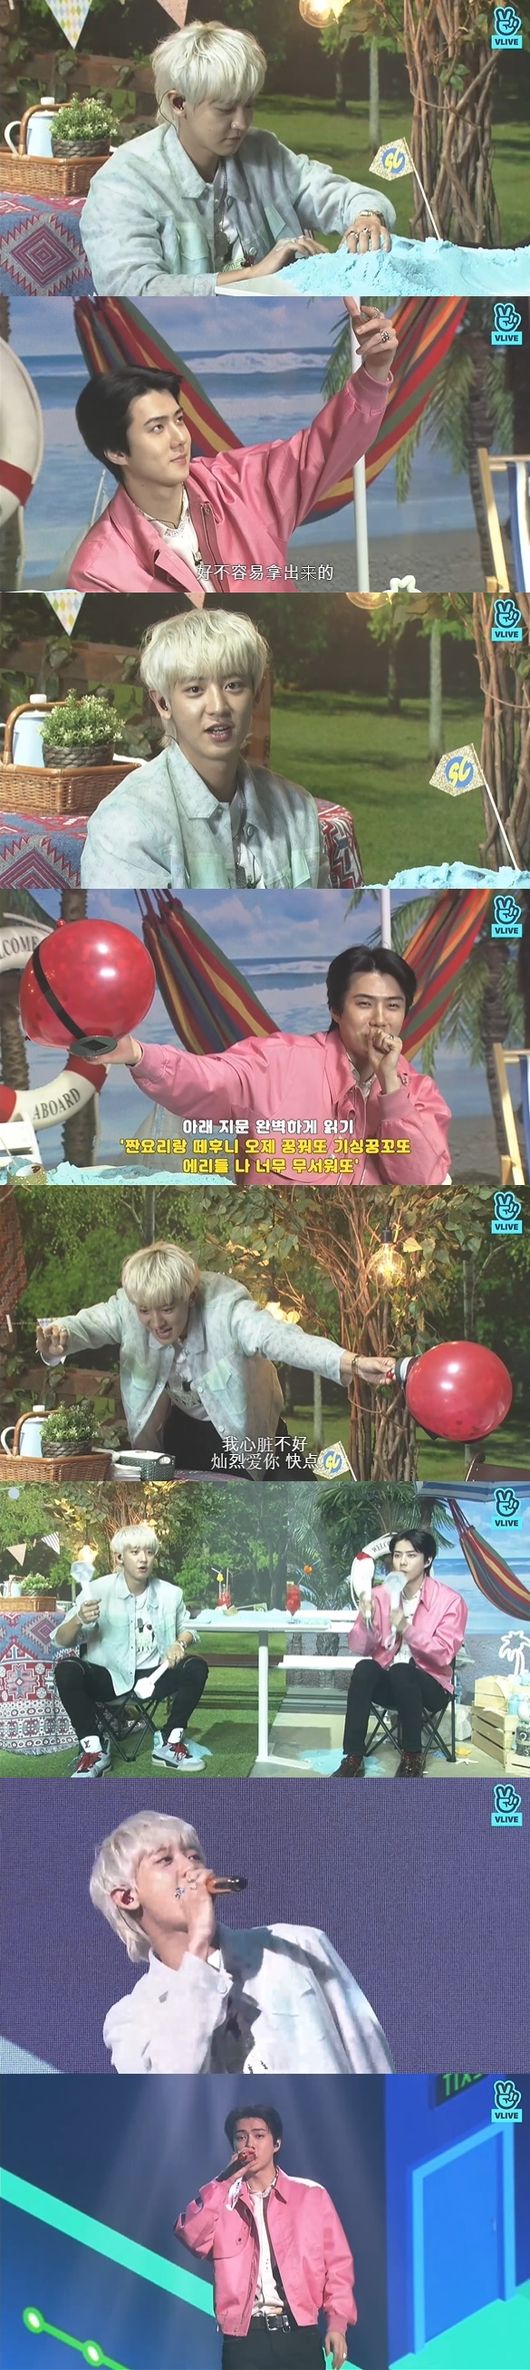 Sehun & Chanyeol also played a new song of the regular 1st album, including a pleasant talk with fans.On the afternoon of the 19th, Sehun & Chanyeols SUMMER PARADISE was broadcast through the portal site Naver VLove Live!EXOs unit group Sehun & Chanyeol released its regular 1st album title song A Billion View on the 13th.A billion view is a hip-hop song with funky guitar sound and disco rhythm.In the lyrics, I likened the heart to continue to see my beloved lover to the video repeatedly and wittyly released it.Chanyeol said, If you are EXOel people why we are here, you will know. ExOel people sent me a question. I will explain why I chose the recommended song among these songs and explain why I fit the question.Sehun said, There is a person who loves him, and he has a story that he wants to know what his mind is.I recommended this song because it means I think about you everywhere in the world.Chanyeol said: Dont be too in love, just scream (Confessions) and do it better than regret it.Once you convey your heart, you can also know his heart, said Sehun.Sehun said, I have an important schedule a few days later and I pretend not to be trembling at all. Do you have a song that raises confidence? I would like to recommend a solo song On Me, which is a song that expresses myself, and I have a story of my pride. Chanyeol said, I think peoples lives are fleeting, but do you have any songs you want to recommend?  Say It.It means to tell you all about your honest feelings, not to hide it. It seems that you really have a good time now and you have no life. I originally thought there was no life overshadowing but its changed a lot these days - Im always trying to live happily, Sehun said.Chanyeol said, Is it not painful when you remove your brothers wings? Is there a song you want to tell when you are sick? My solo song Nothin.I think there are many themes and meanings in this song, but the theme that comes first is painful, and even if it is hurt, it will go my way silently.It means that we will push it like the words that the land will be hard after raining, if it will come after hardship. In the second corner, Whatever Questions Seyol, Sehun & Chanyeol had a time to answer the various questions of fans honestly.Sehun said: We have different musical tastes from each other; I mainly listen to foreign hip music, but these days I listen to heart-warming ballads.Its good to have mentally helpful lyrics, such as Get on it, he said.The Music spectrum is so wide, these days its stuck in EDM; theres a must-listen and sleep music at home, and nowadays theres a dedicated lullaby, Chanyeol said.Asked if he was weapon, is there any way to overcome it? Sehun said, It helps to talk to people, or watch movies, and now I enjoy helplessness.I was training underwater for a recent movie, and I did a free diving. It was fun to wear glasses.Any man and woman can do it, he explained.In the middle of the corner, a balloon bomb appeared in front of two people, and various missions had to be carried out in time.Sehun & Chanyeol, who was nervous about the balloon, was confused, Chanyeol said, I do not want to do this again, Sehun said, I am so scared of this.Im hurt, he said, laughing with a cold sweat.Regarding self-know-how, Sehun said, I hate taking self-portraits personally, but I take it well when I take it again.Chanyeol said: The strongest secret is the app; its weird if you dont use me because its all used these days, and selfies are unconditional angles; angles are the most important.Sehun & Chanyeol received an explosive response by releasing the song cheering method of the new song A billion view.Sehun said: I didnt come here today just to talk.I will show you the stage in earnest. He showed the stage of Love Live! such as Rodeo Station , Chuck , Wing , A Billion view and What a life .Sehun & Chanyeols SUMMER PARADISE broadcast screen capture